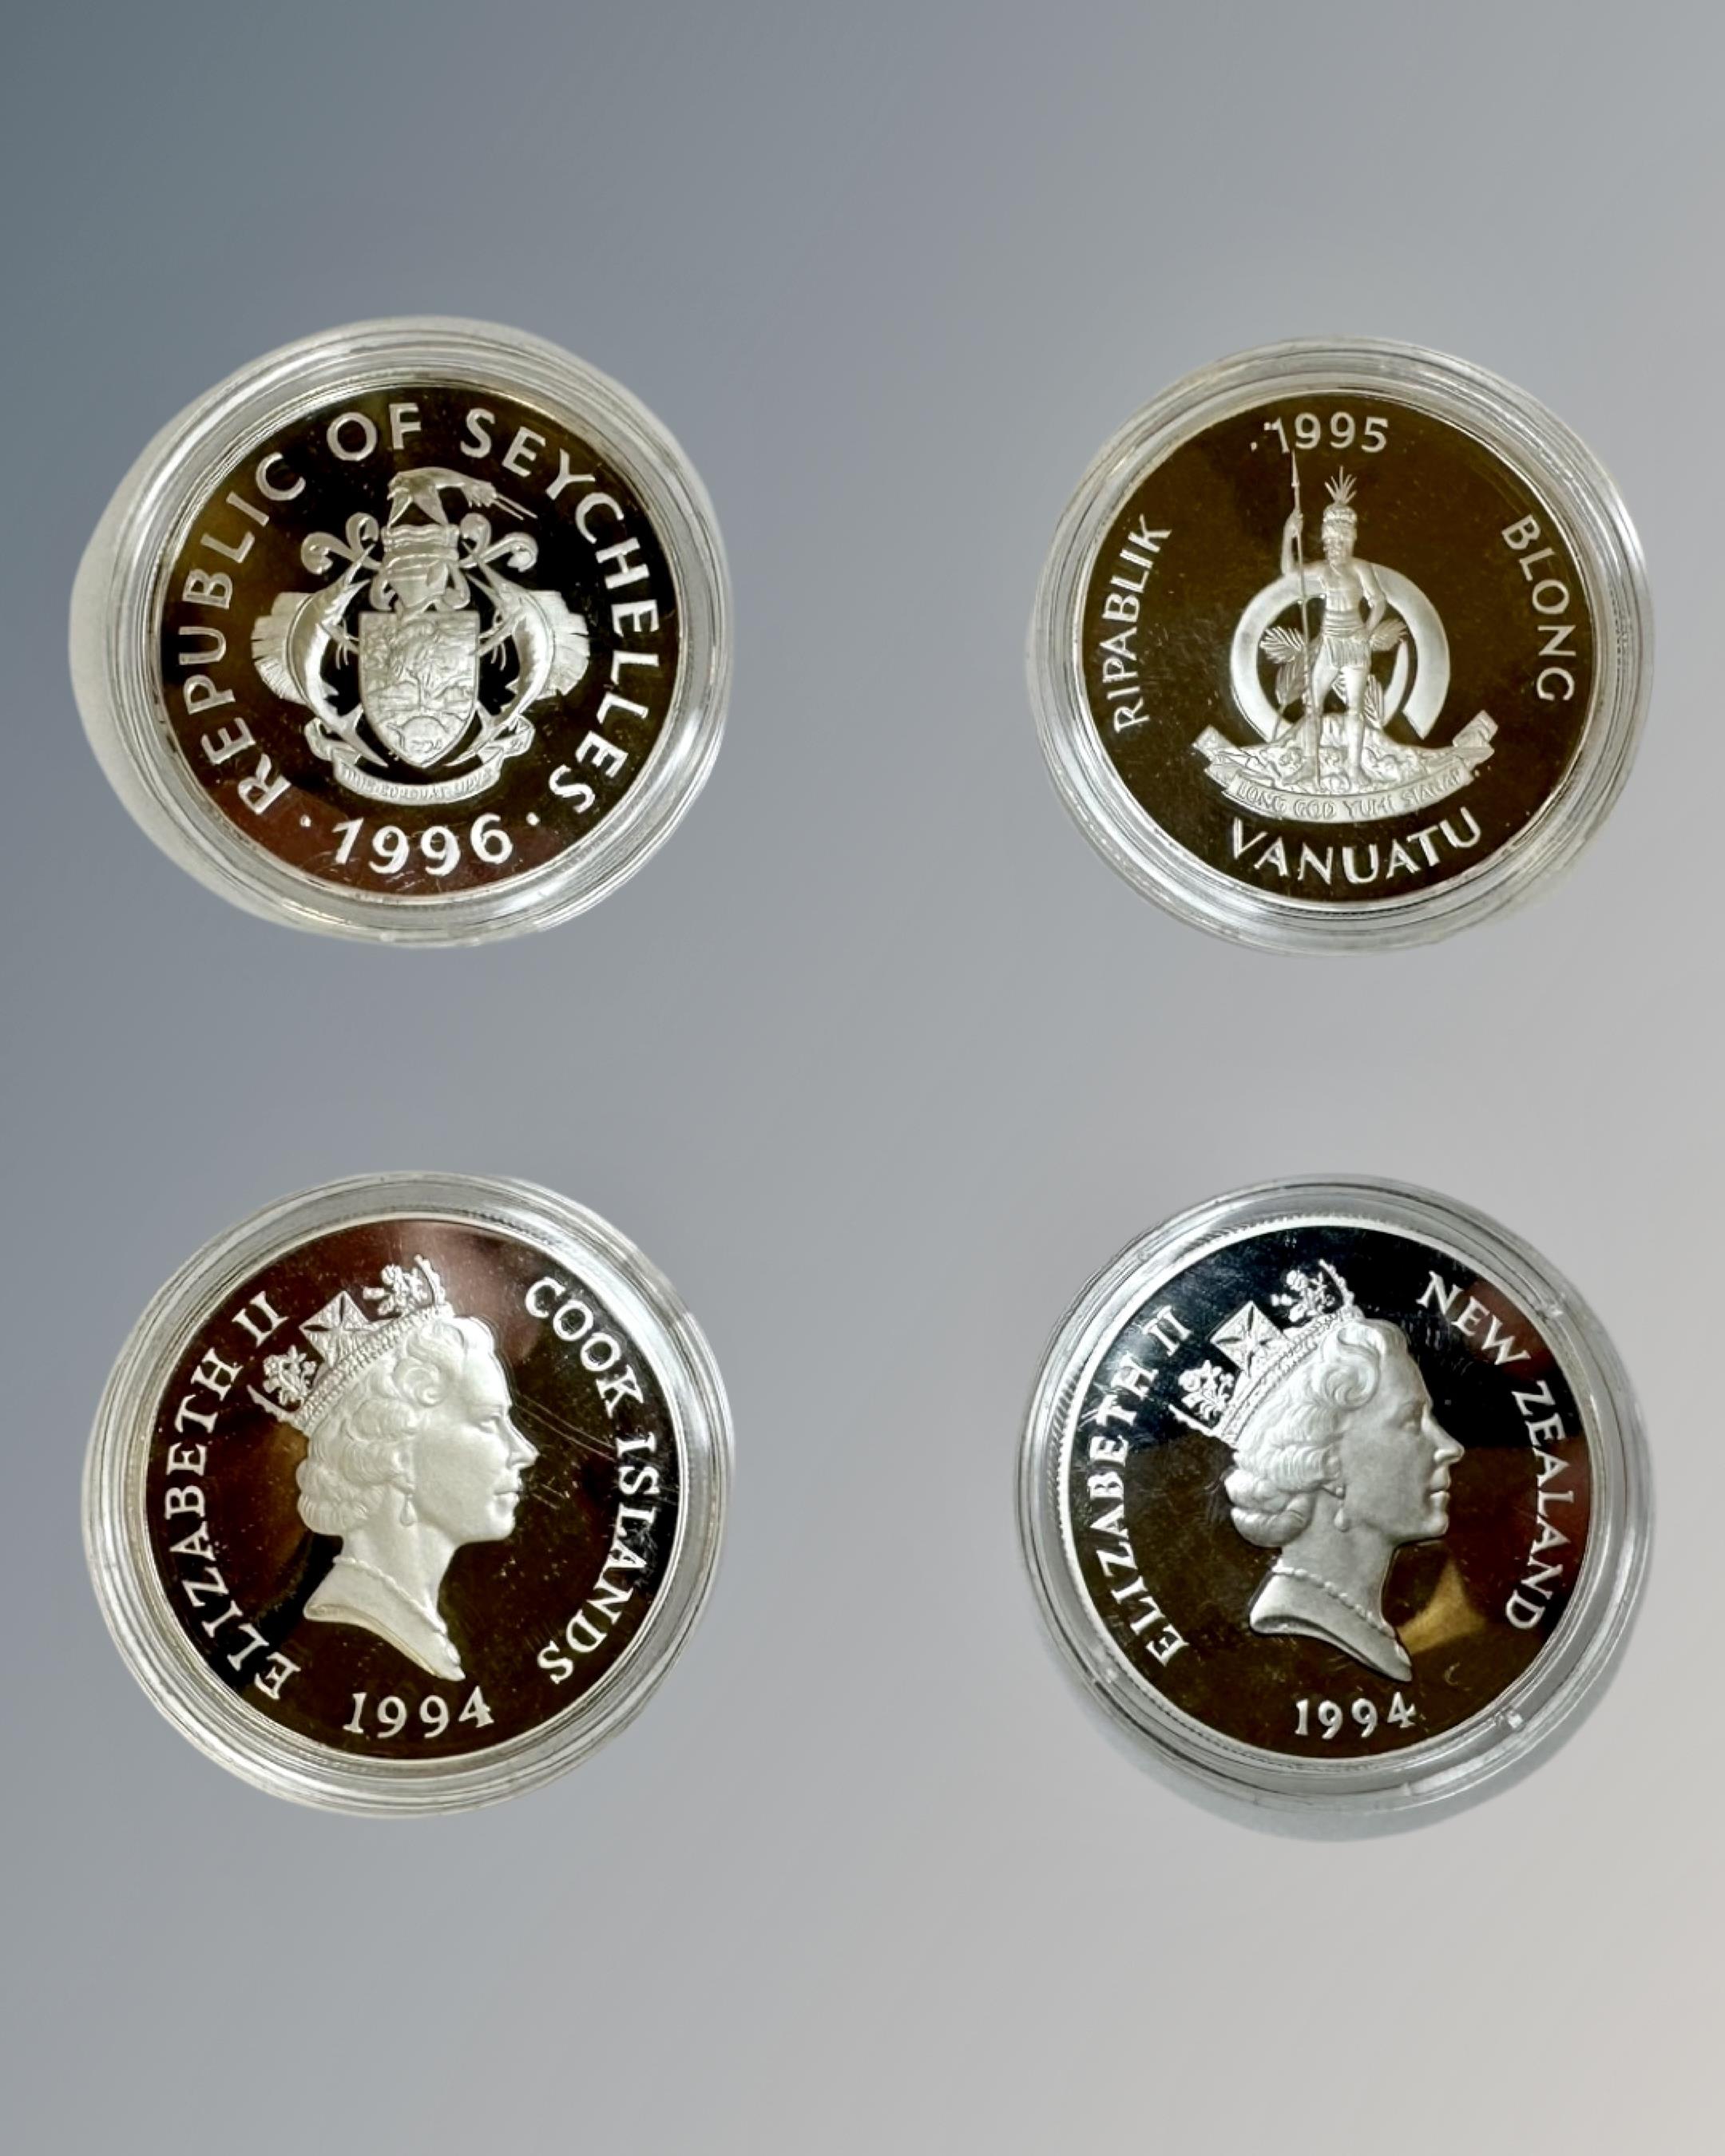 Four silver proof crown size silver coins, Seychelles, Cook Islands, Vanuatu and New Zealand.